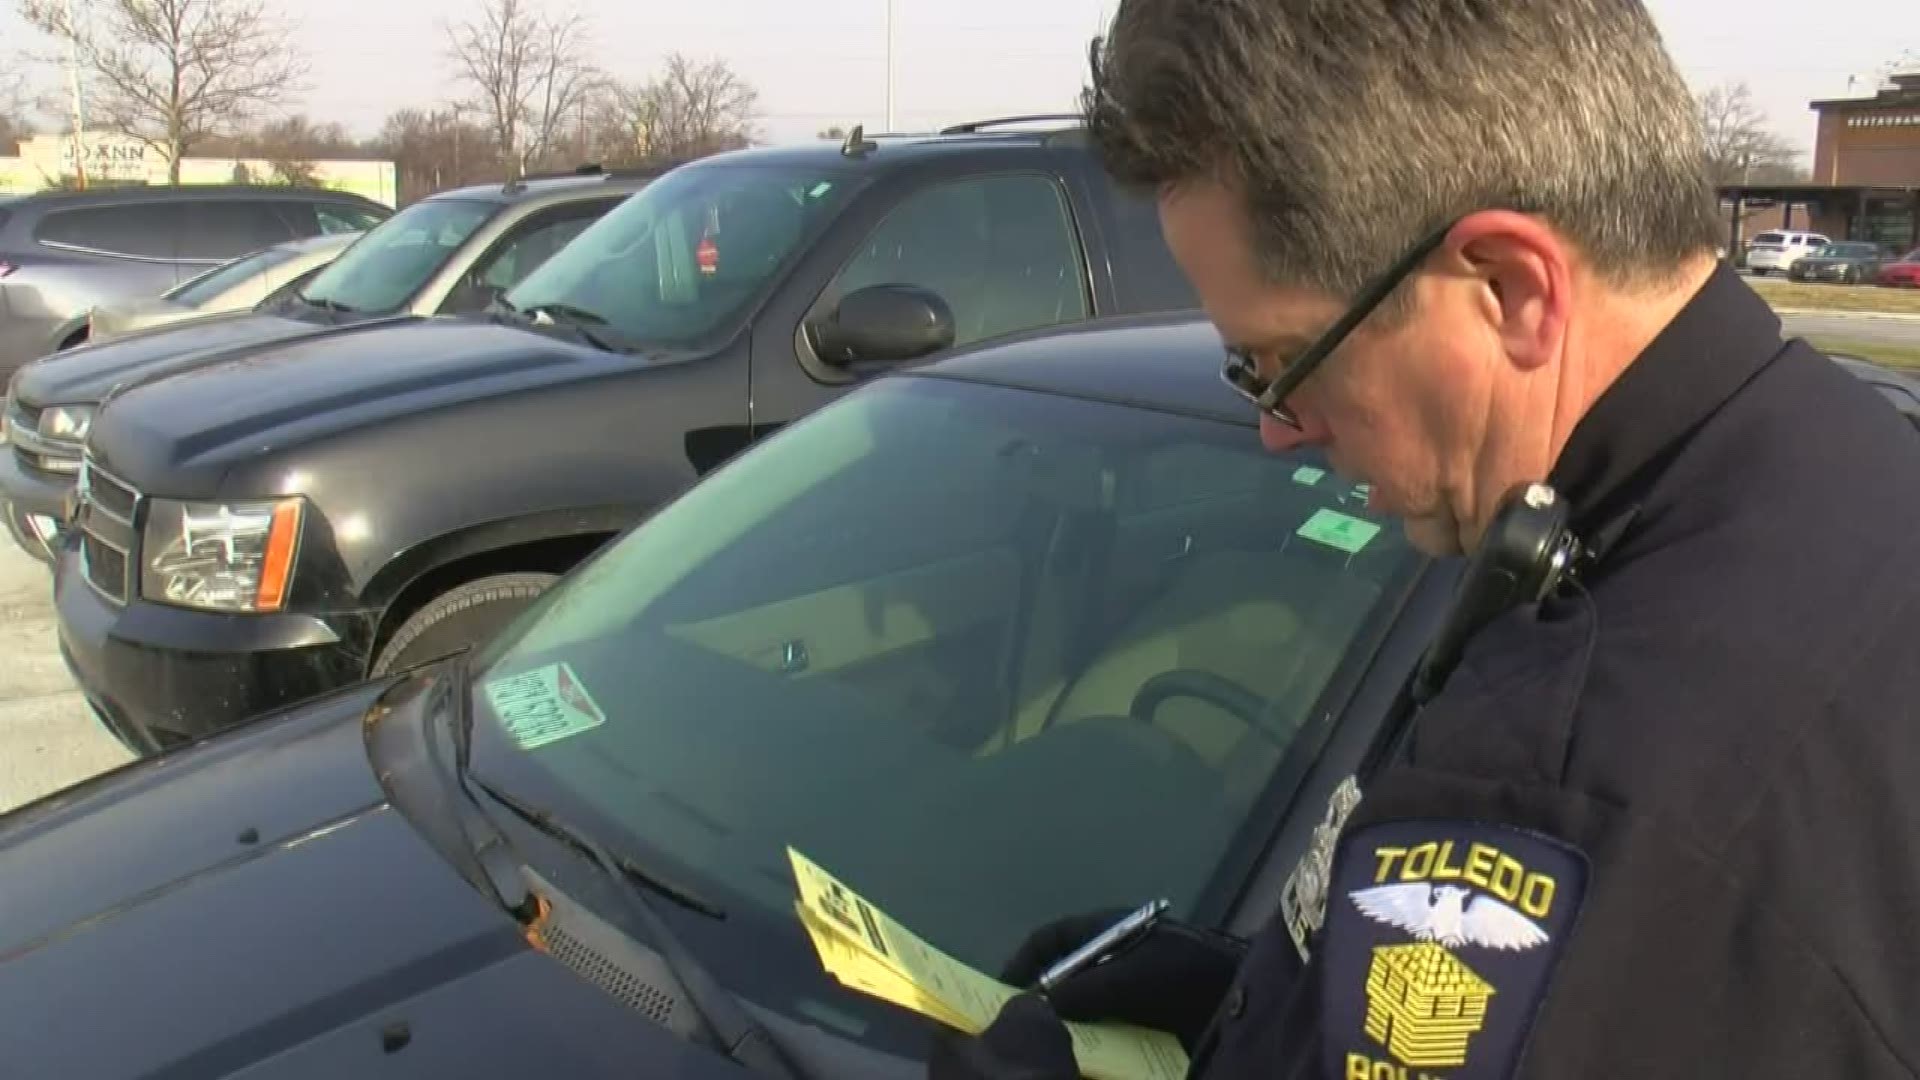 Toledo police are issuing vehicle report cards to educate drivers about leaving enticing items out in the open.